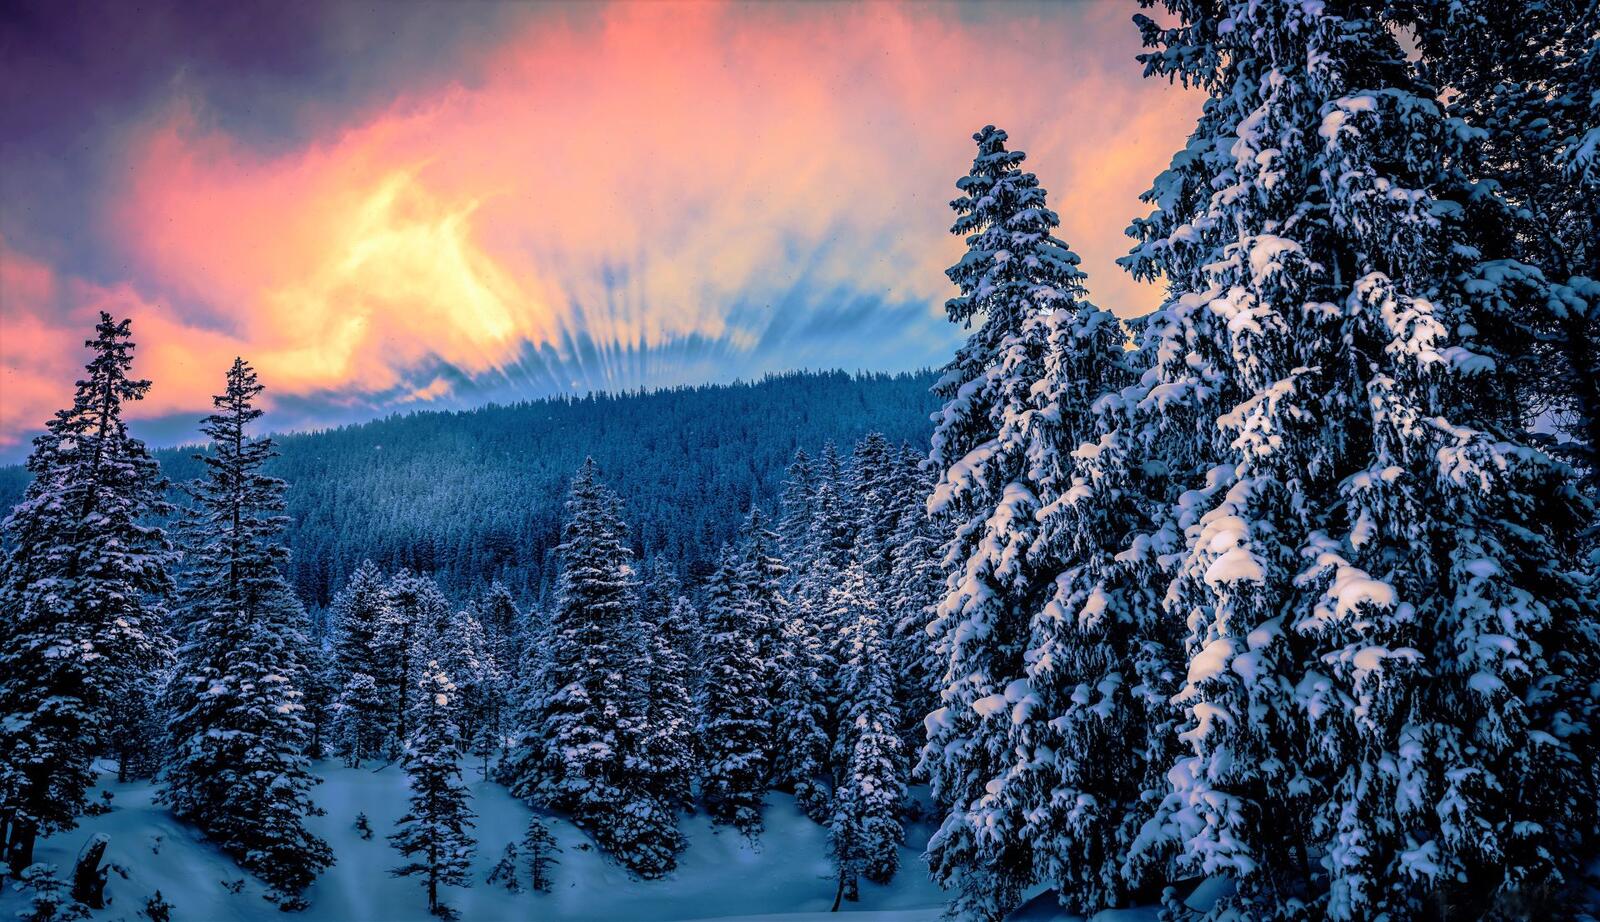 Sunrise over the snowy forest